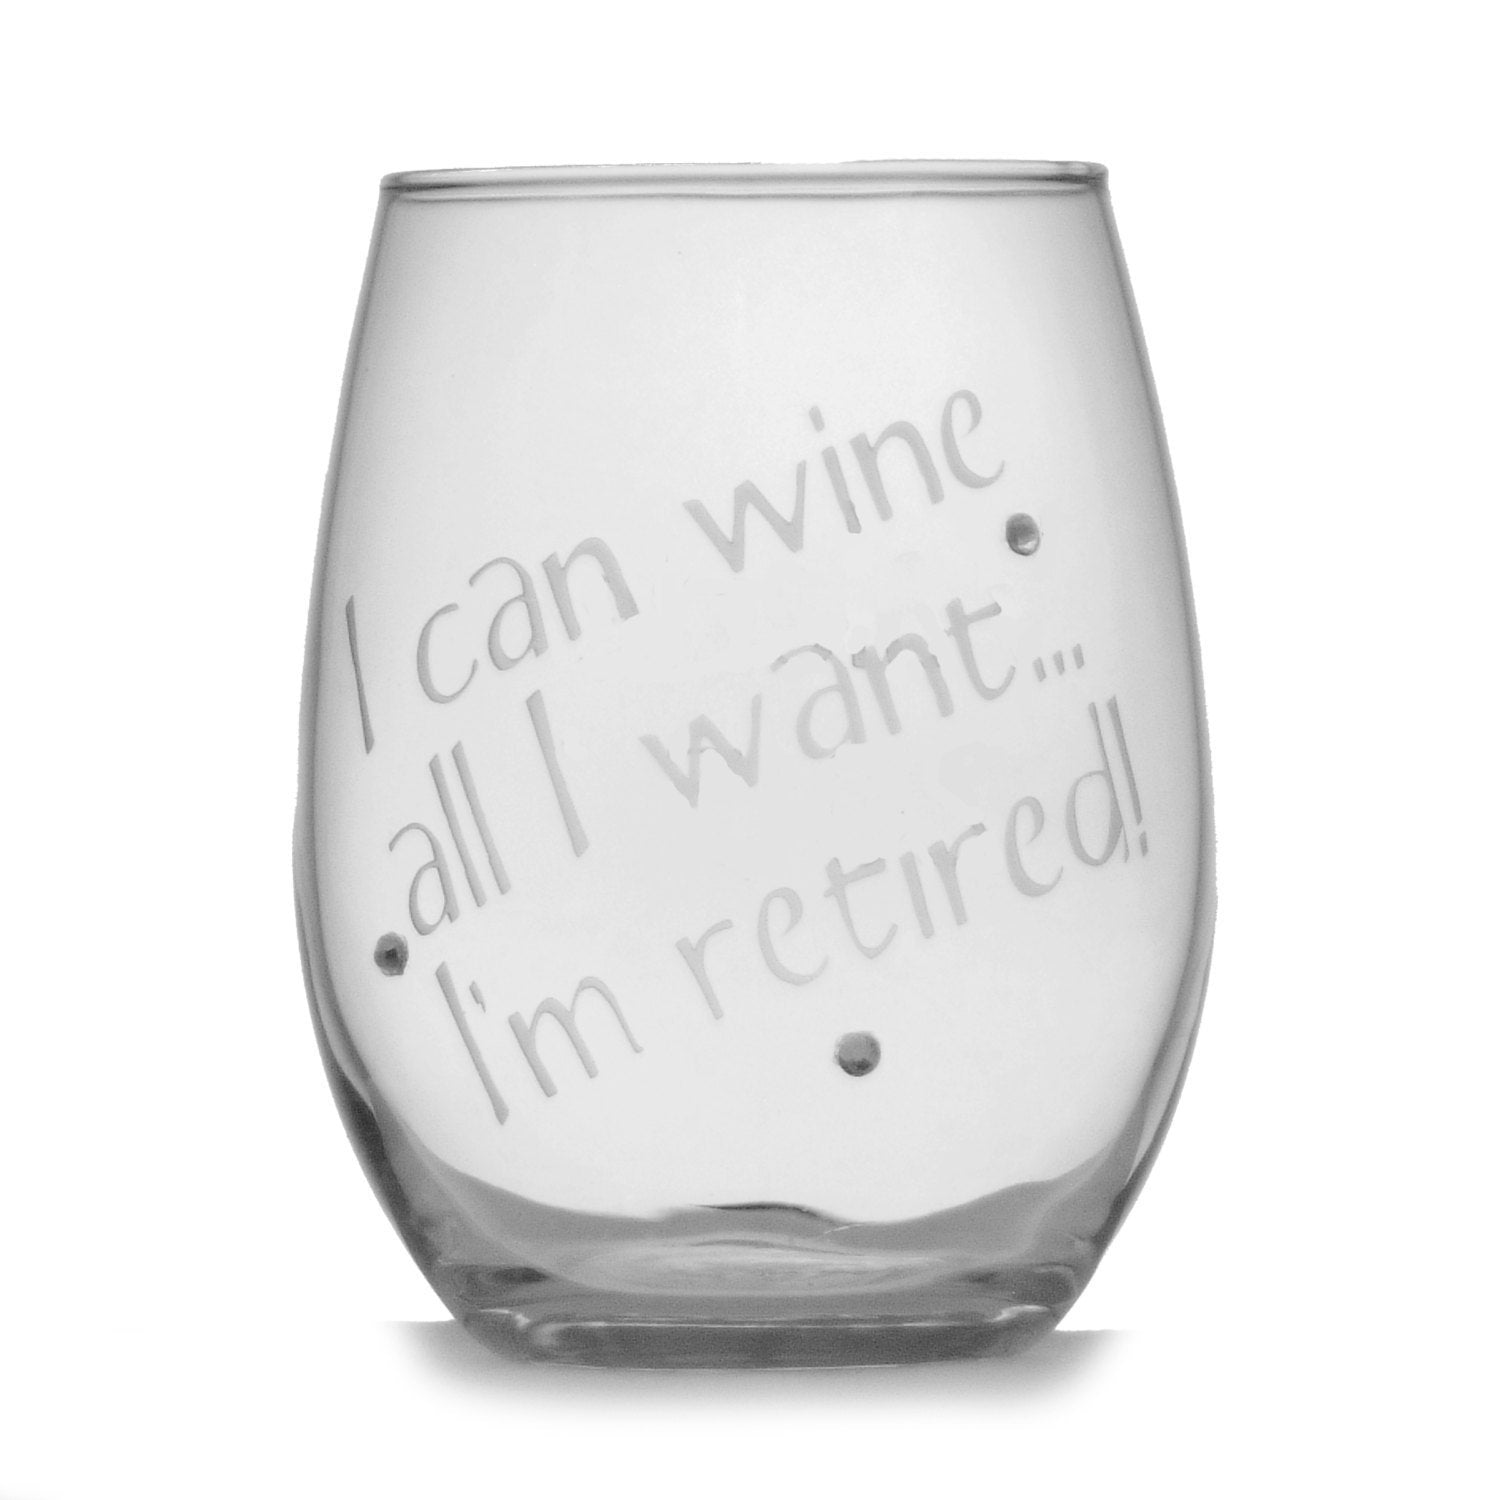 Retirement Gift I Can Wine All I Want - I'm Retired Personalized 15 oz stemless wine glass | Funny Retirement Gift | Retirement Wine Glass